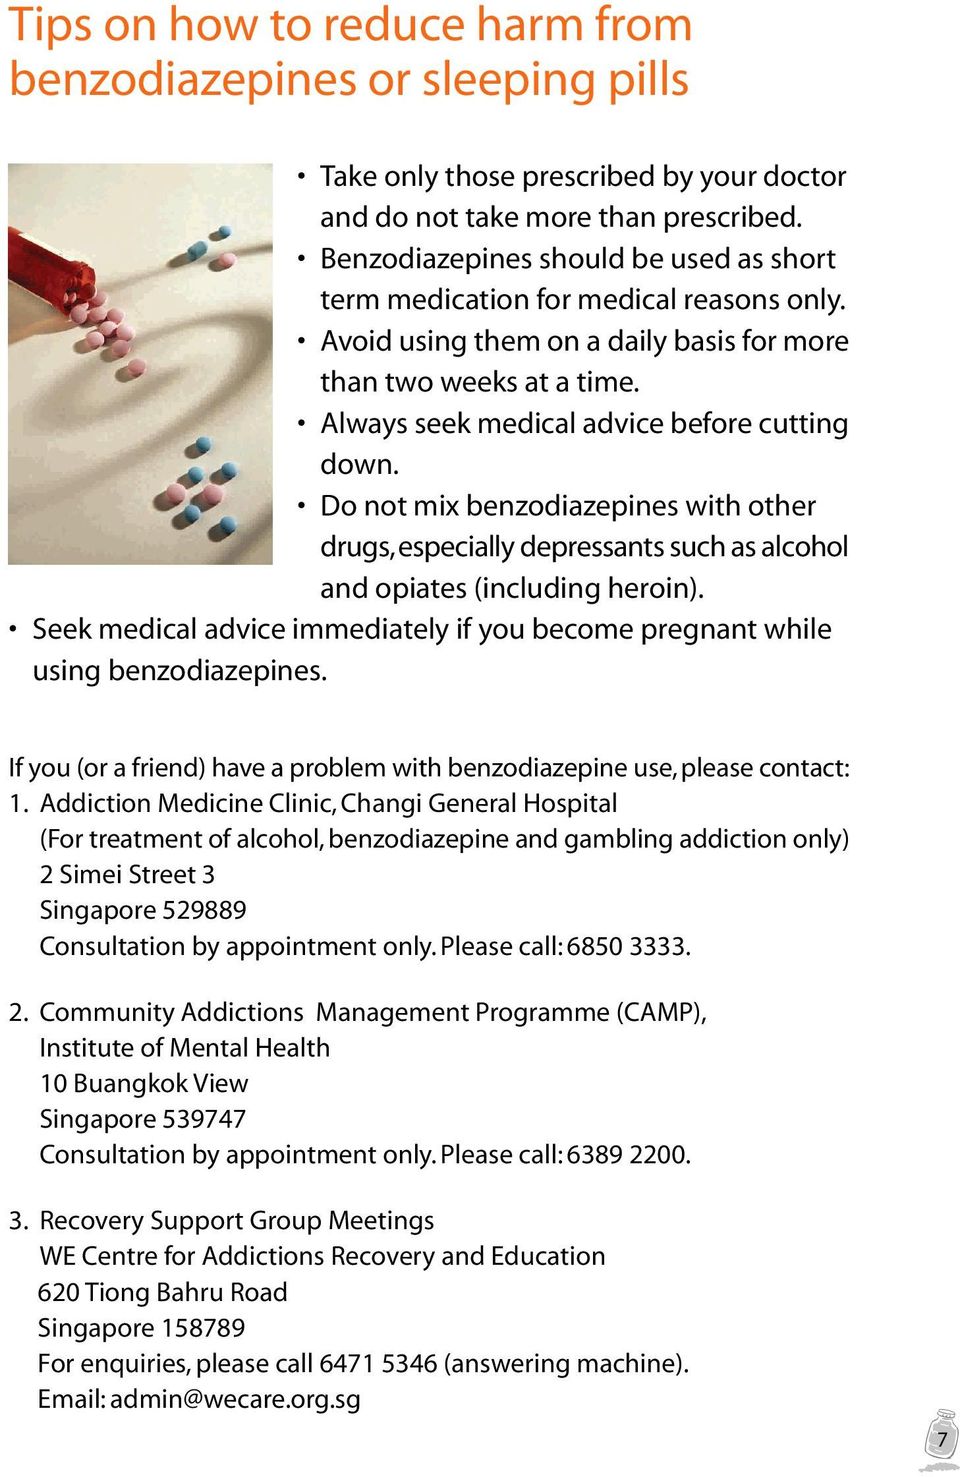 Do not mix benzodiazepines with other drugs, especially depressants such as alcohol and opiates (including heroin). Seek medical advice immediately if you become pregnant while using benzodiazepines.